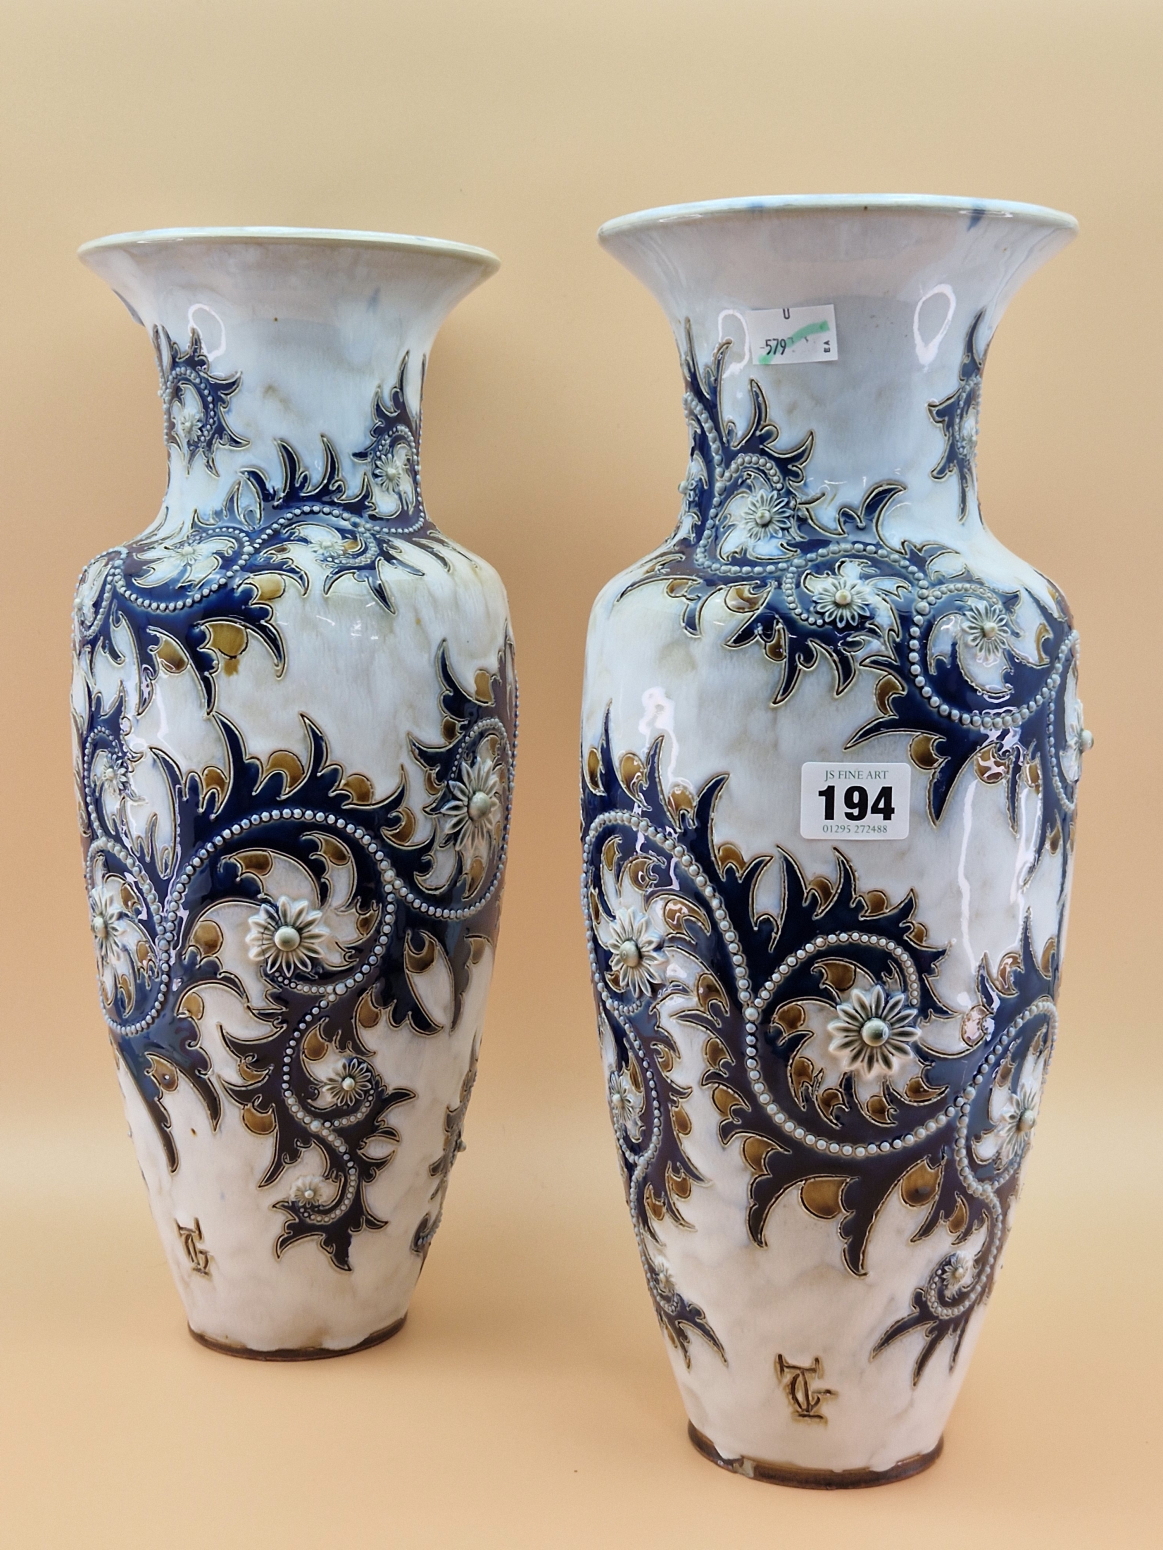 A PAIR OF ROYAL DOULTON VASES BY GEORGE TINWORTH DECORATED IN RELIEF WITH BEADED BLUE VINES